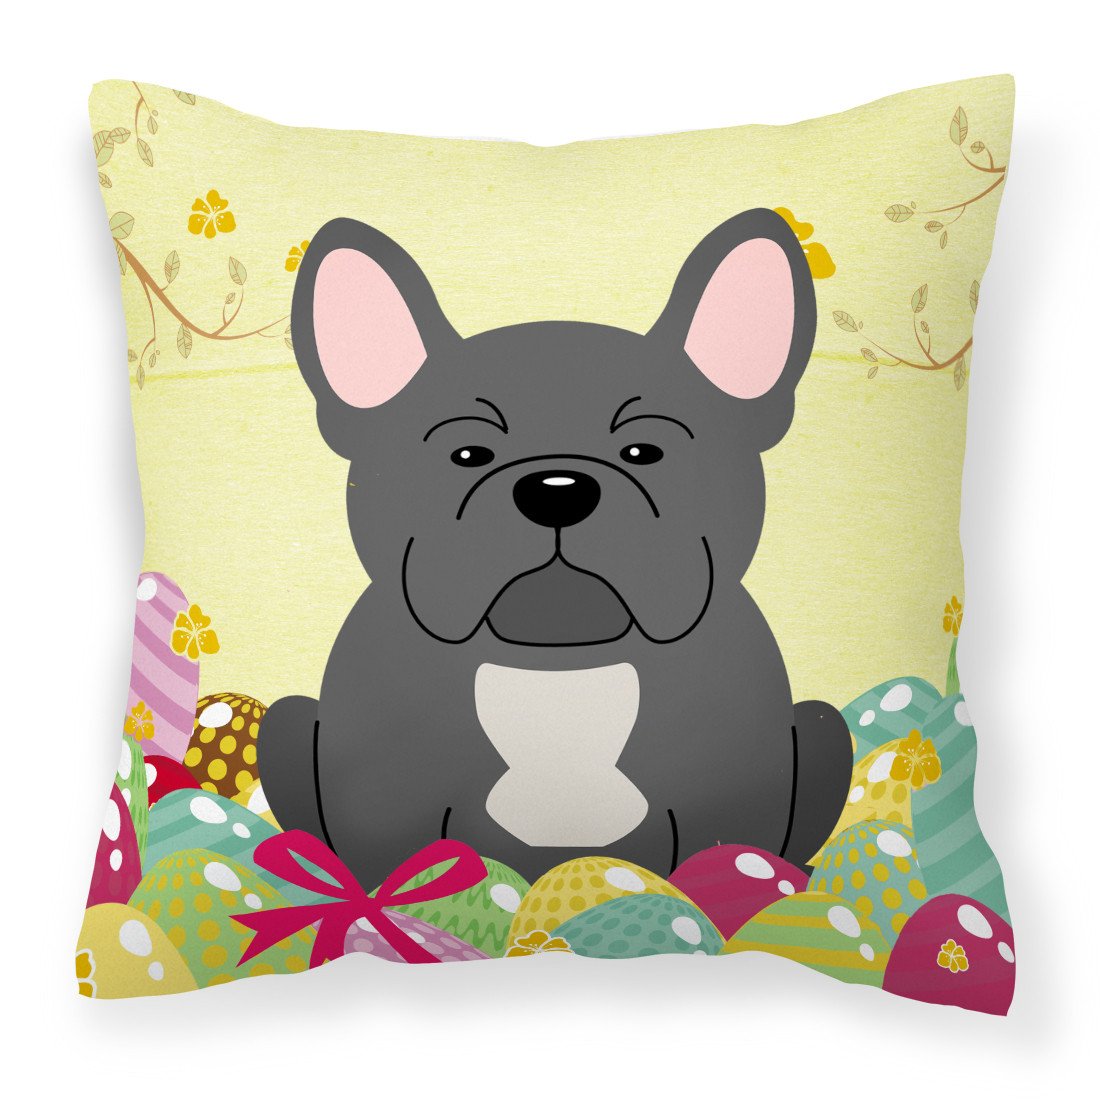 Easter Eggs French Bulldog Black Fabric Decorative Pillow BB6014PW1818 by Caroline's Treasures